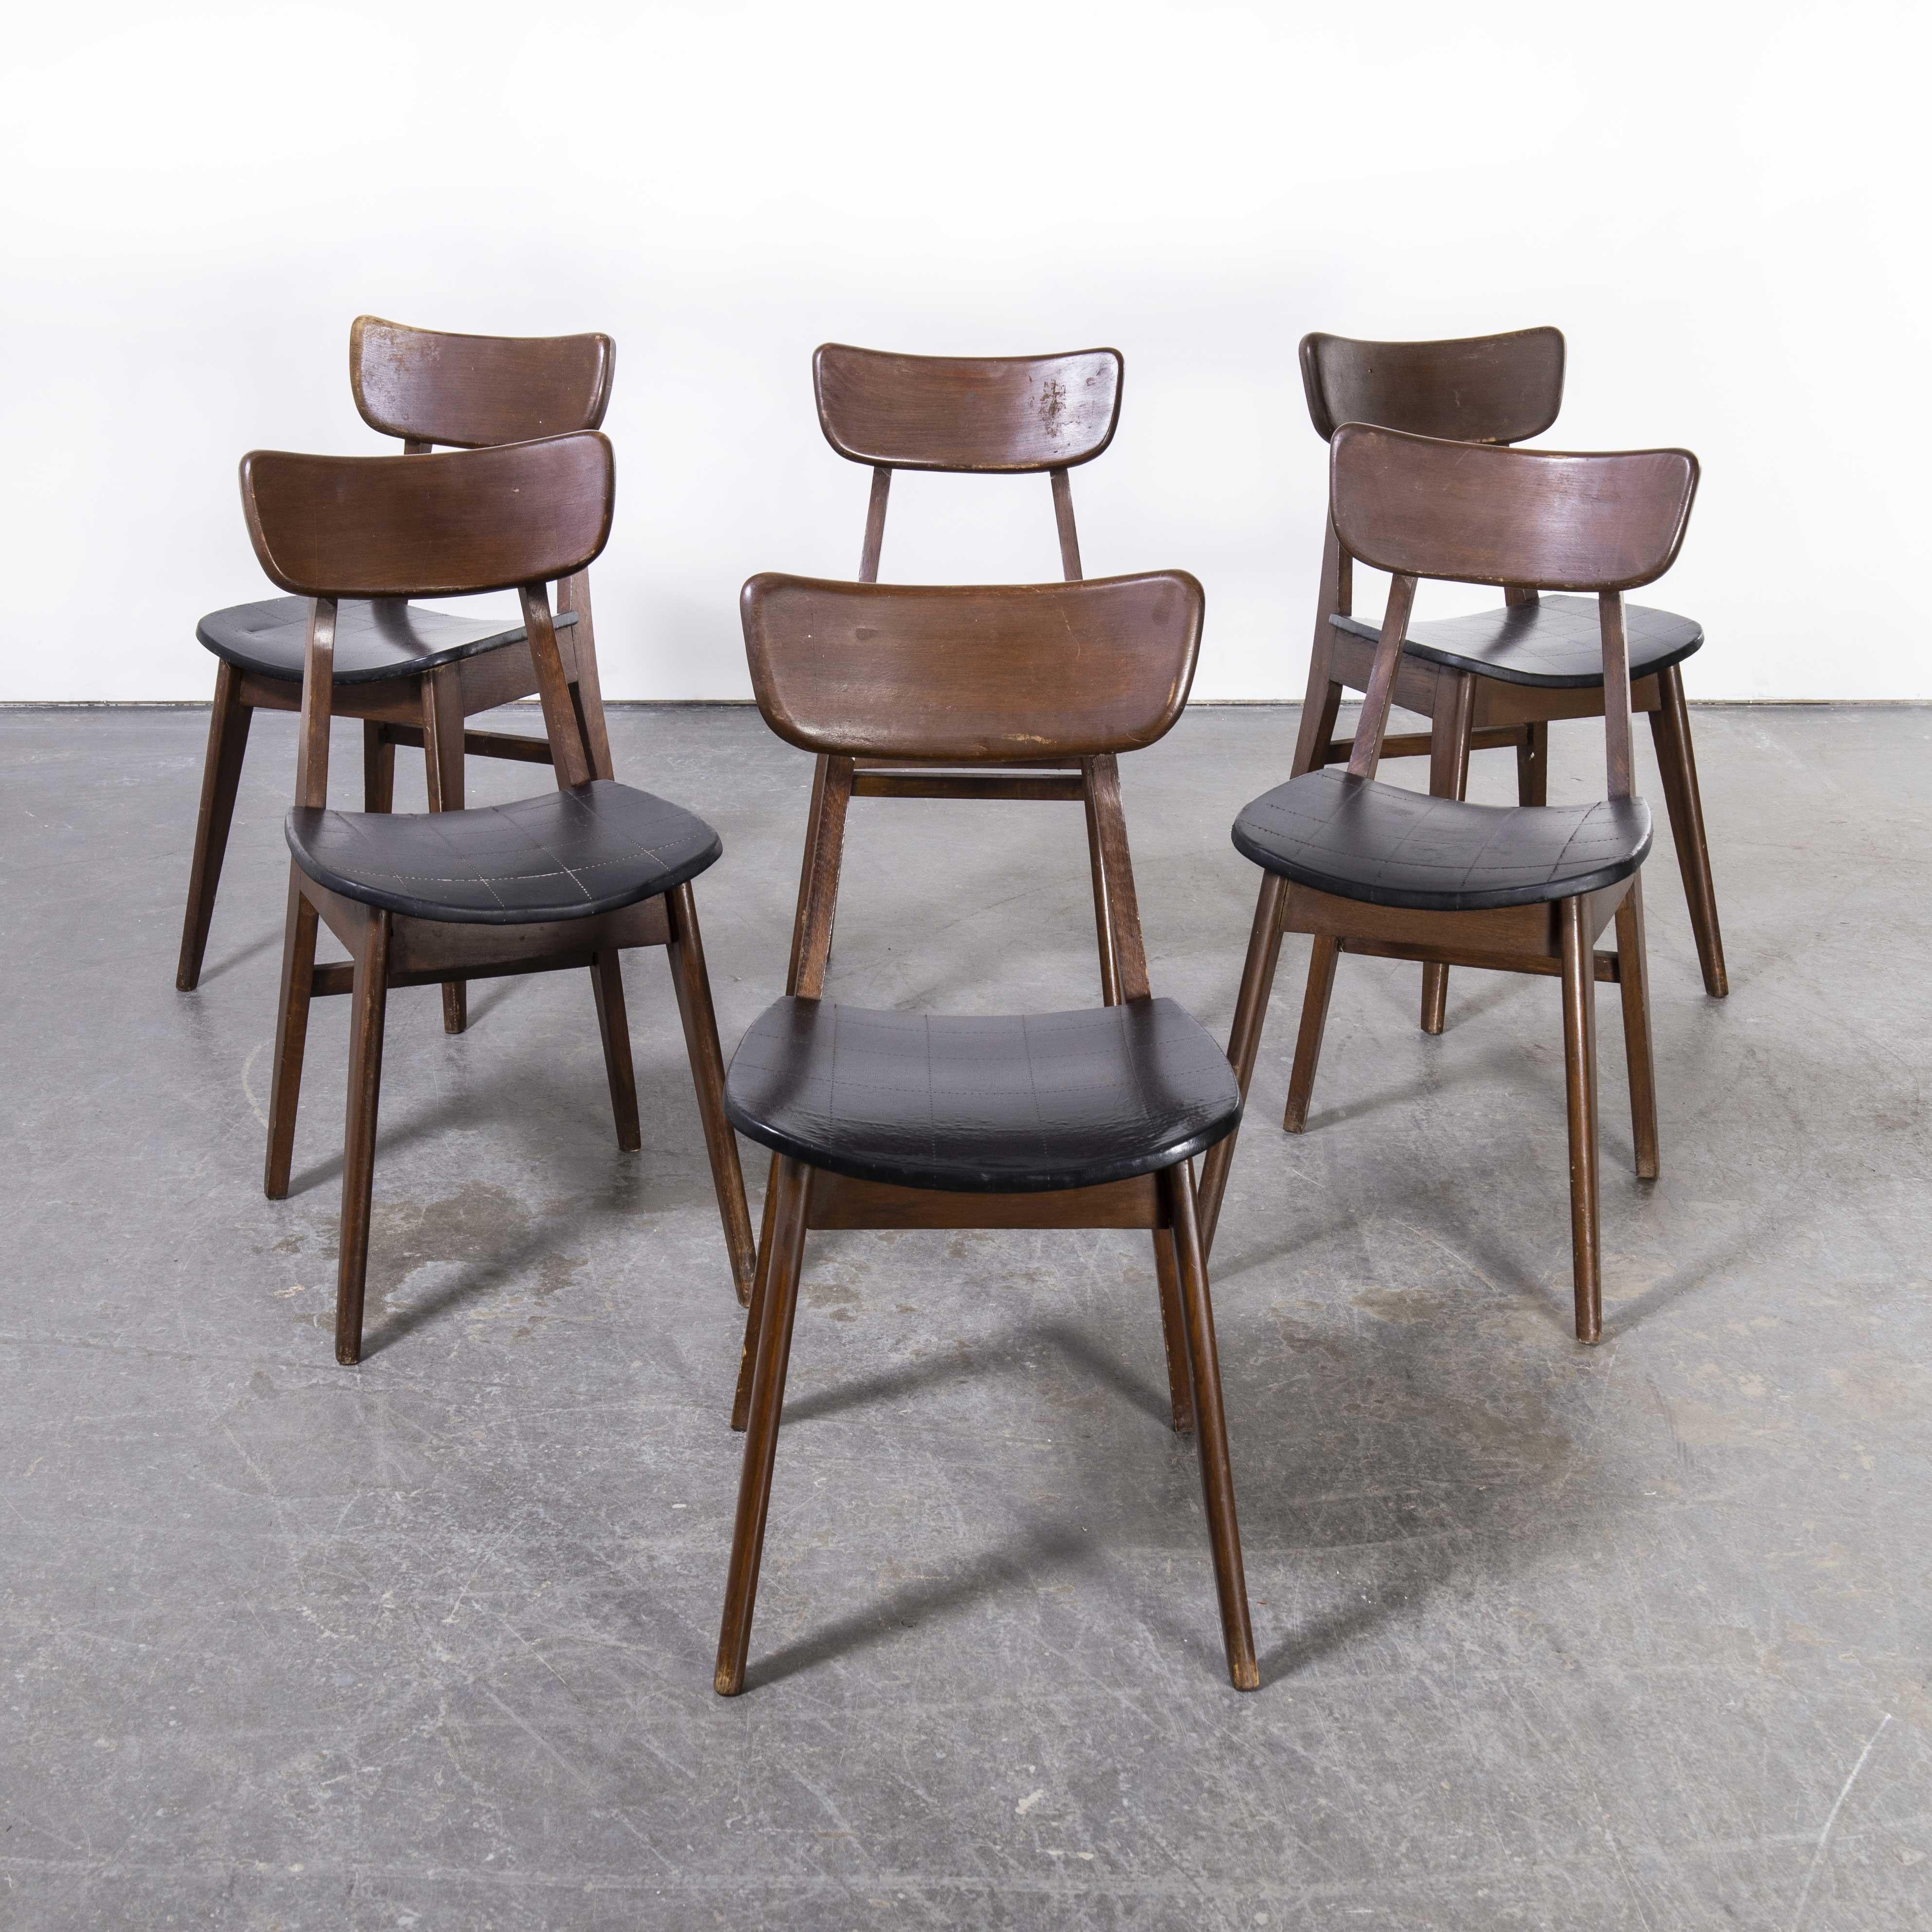 1960’s French Original Mid Century Saddle seat dining chairs – set of six
1960’s French Original Mid Century Saddle seat dining chairs – set of six. Good honest set of mid century chairs sourced in France and dating from the 1960’s. Made in beech